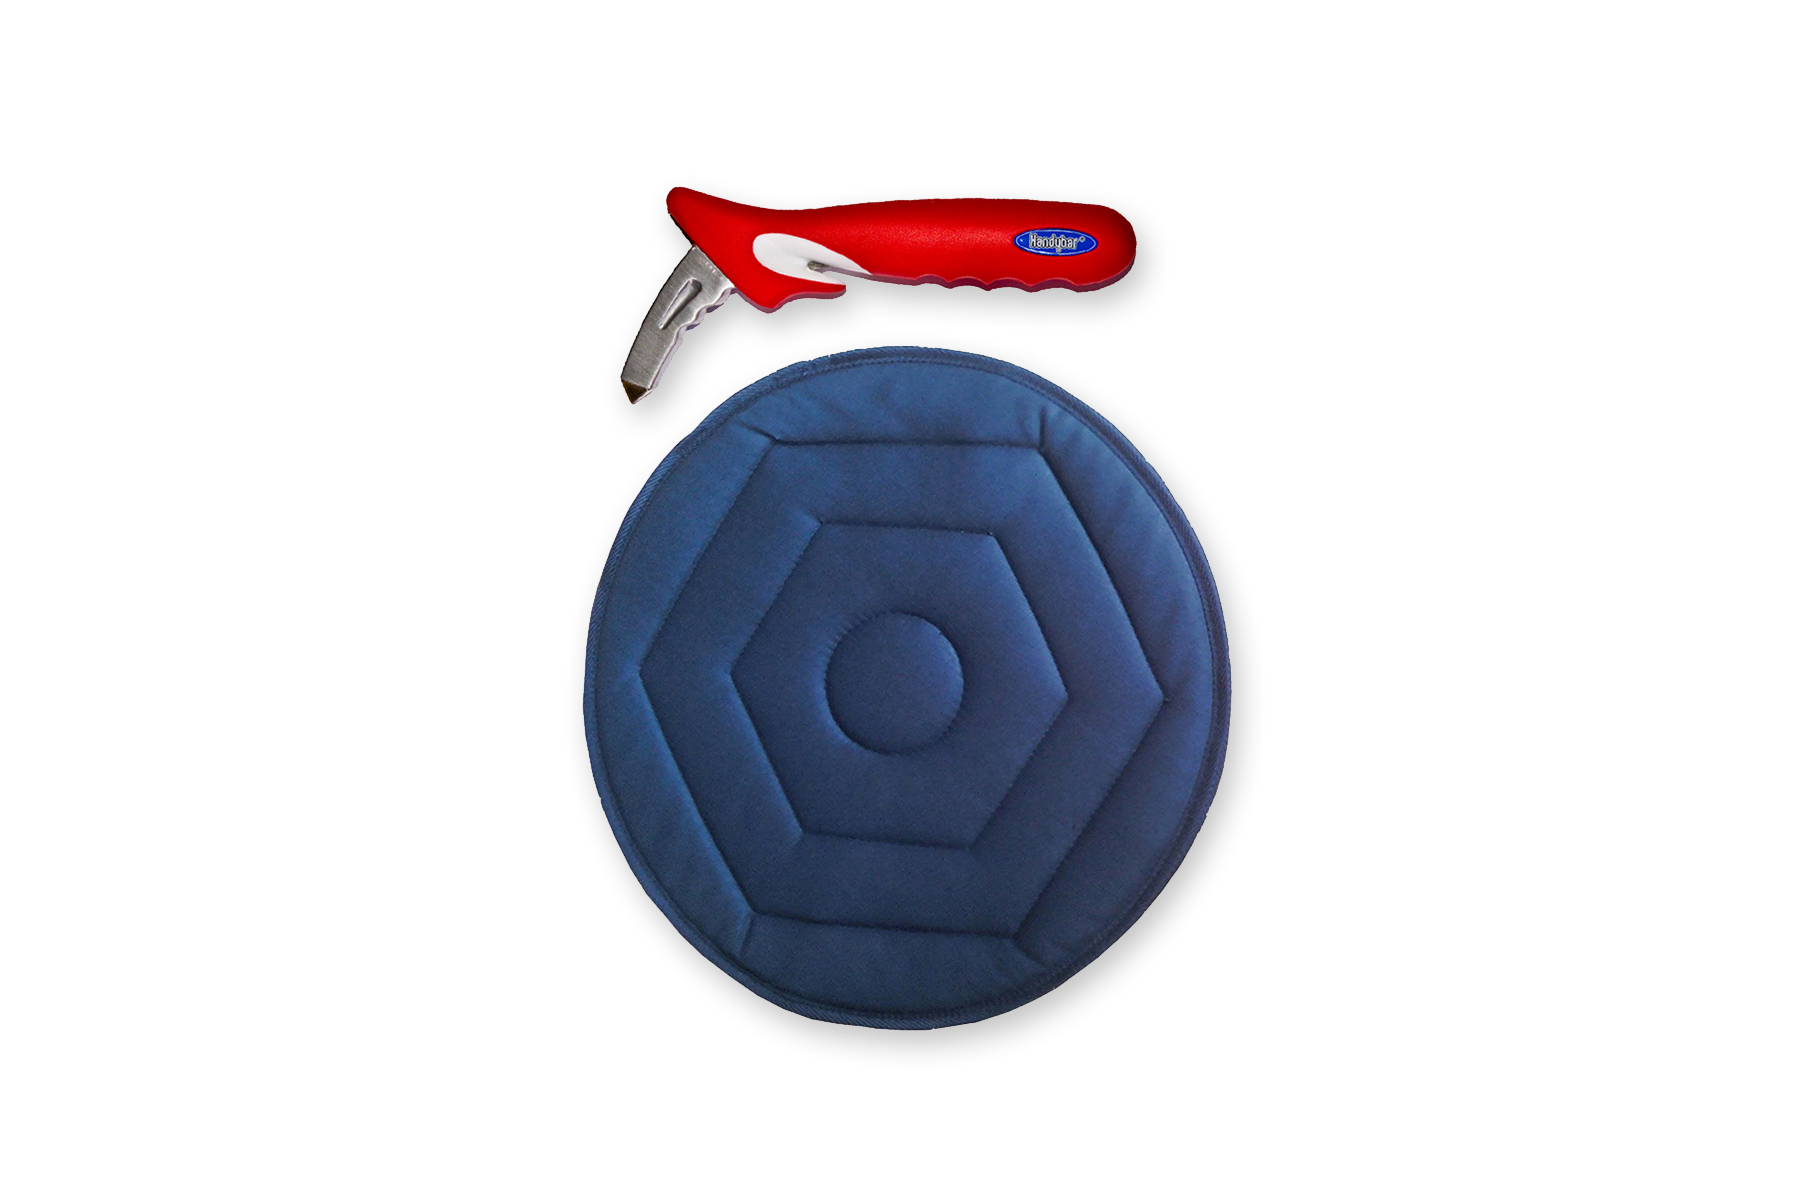 Image of the SwivelCushion and HandyBar items.